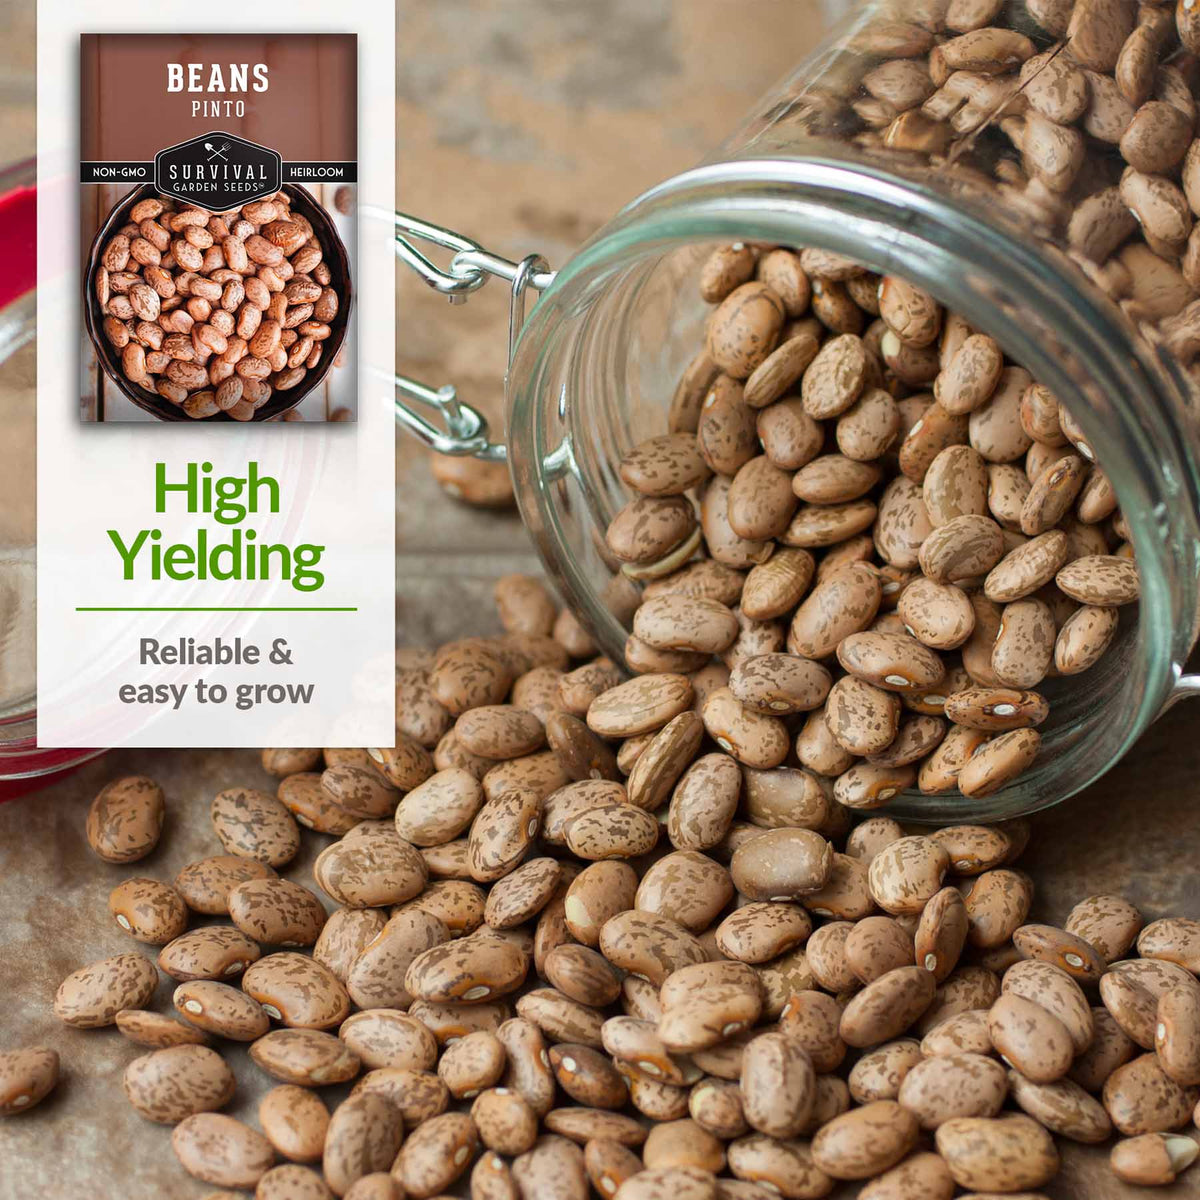 High Yielding - Reliable and easy to grow